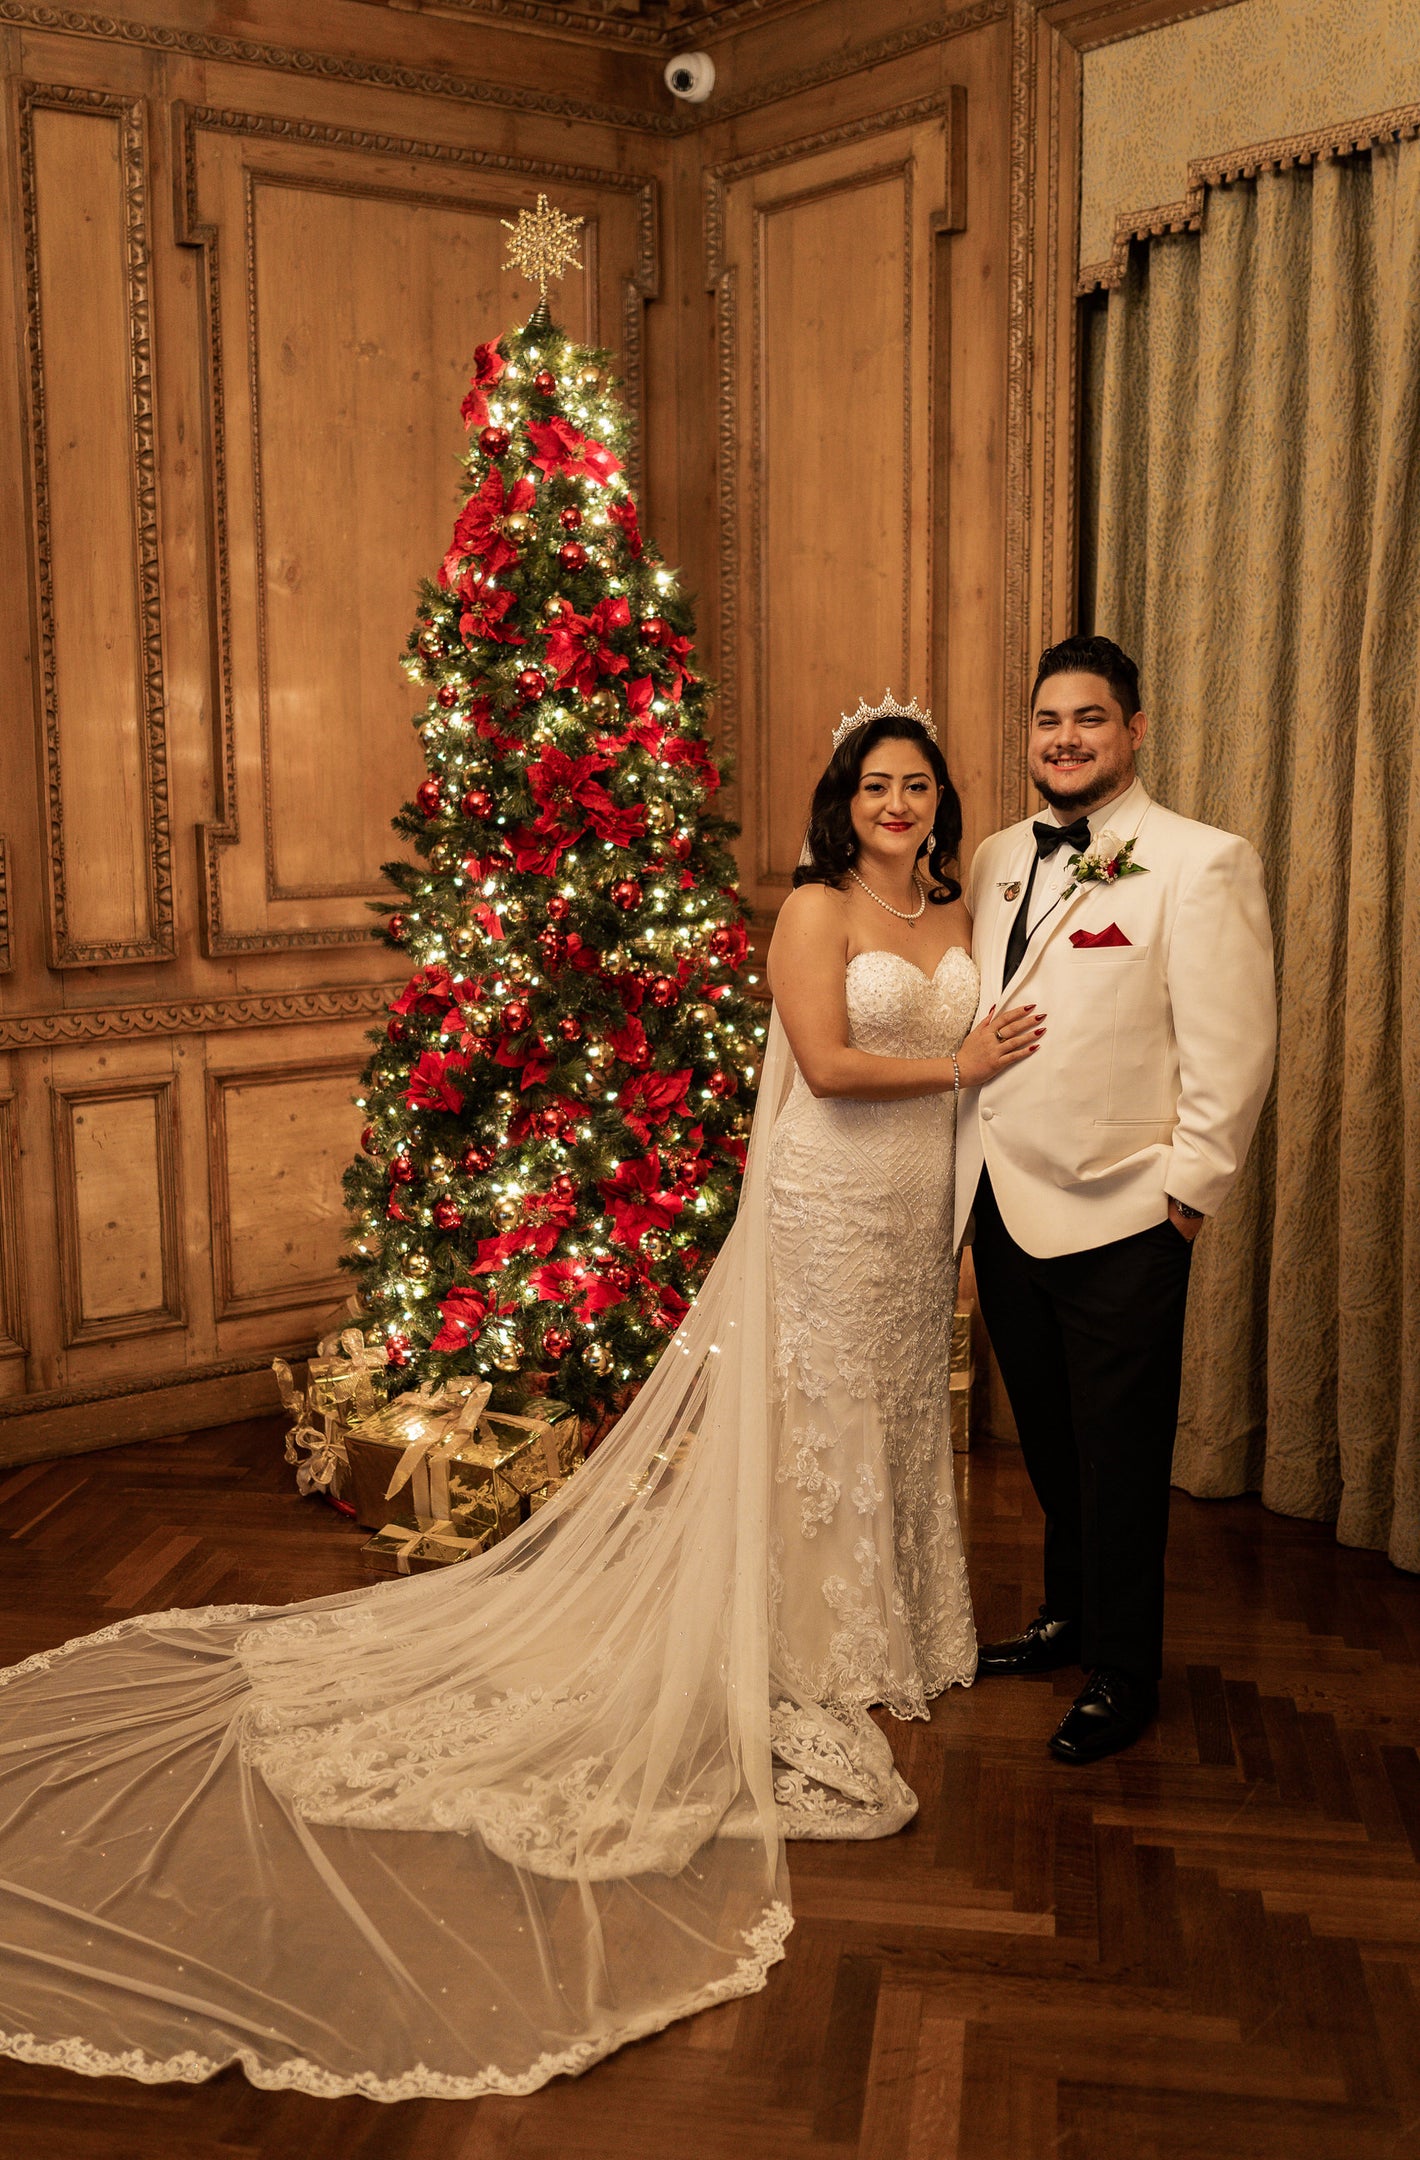 vintage 1920s christmas wedding with English net long royal length wedding veil with crystals and lace and decorated Christmas tree in background